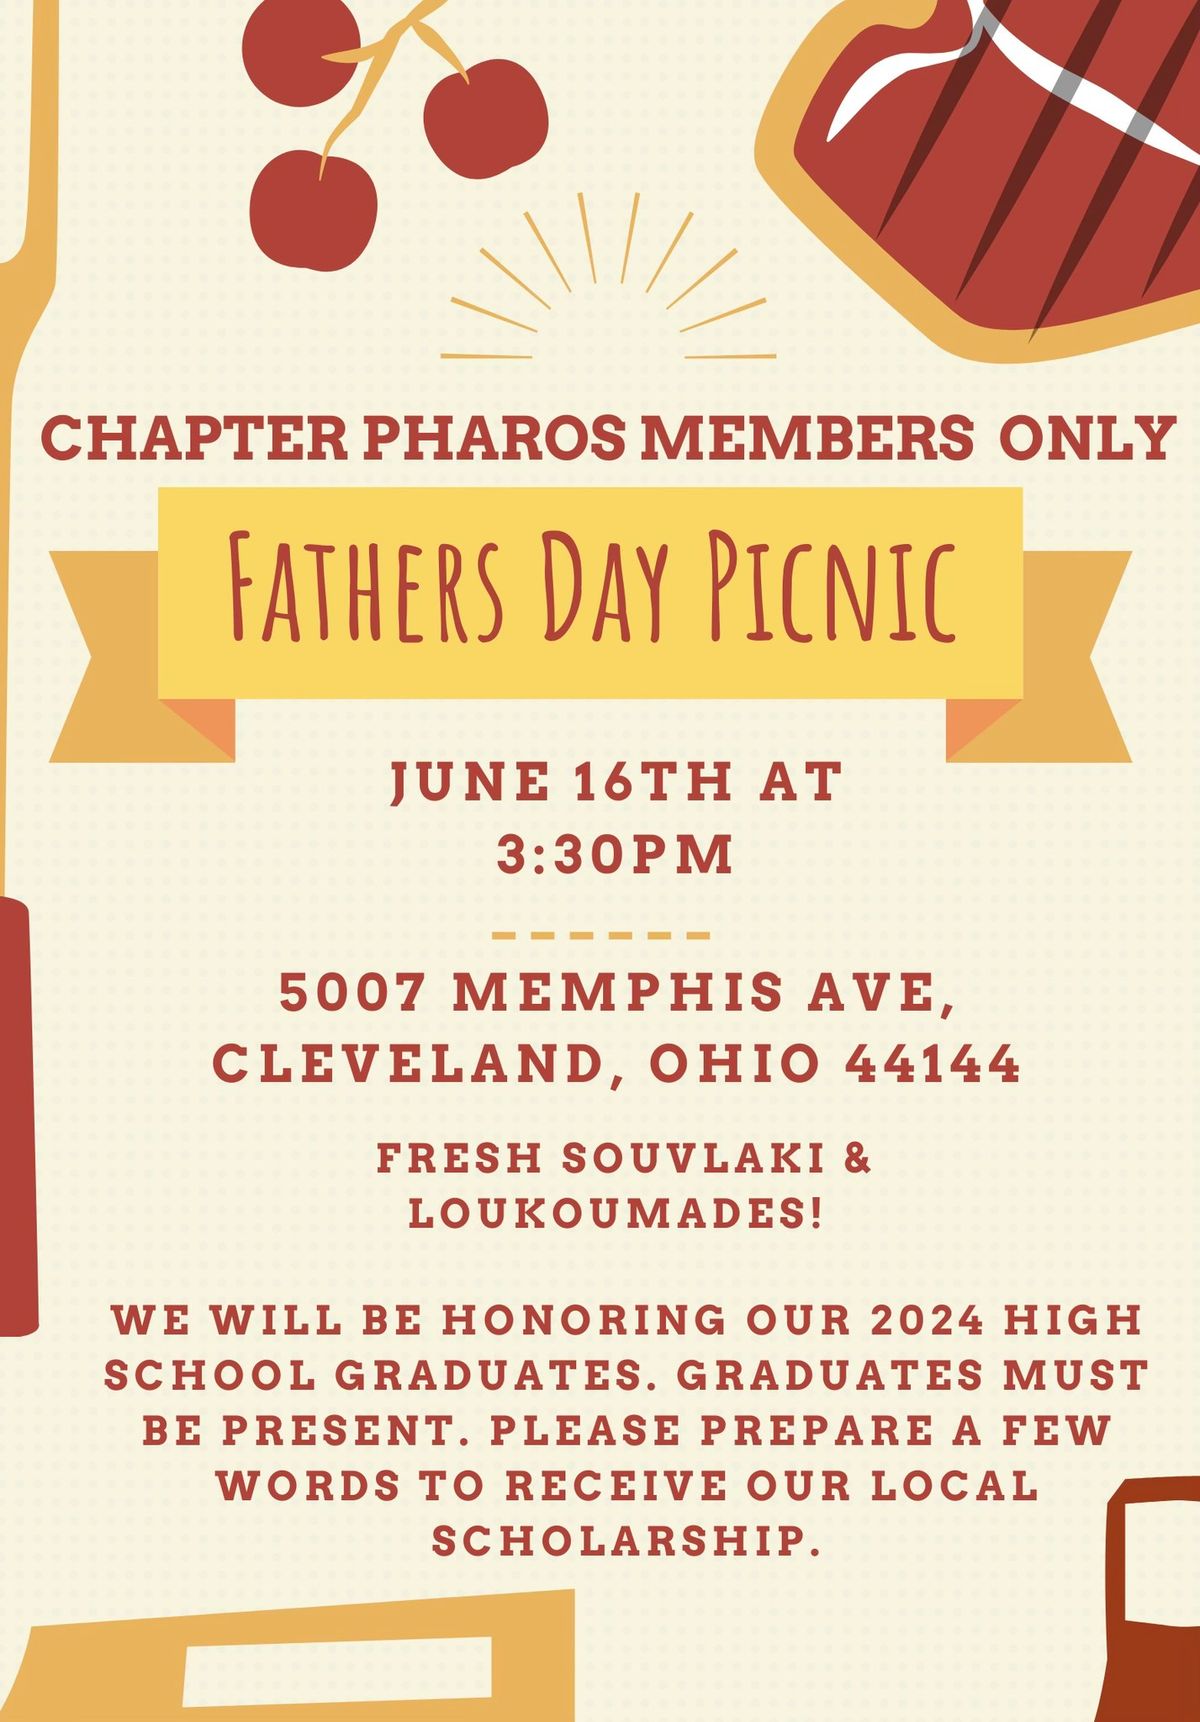 Chapter Pharos - Fathers Day Picnic (Members Only)